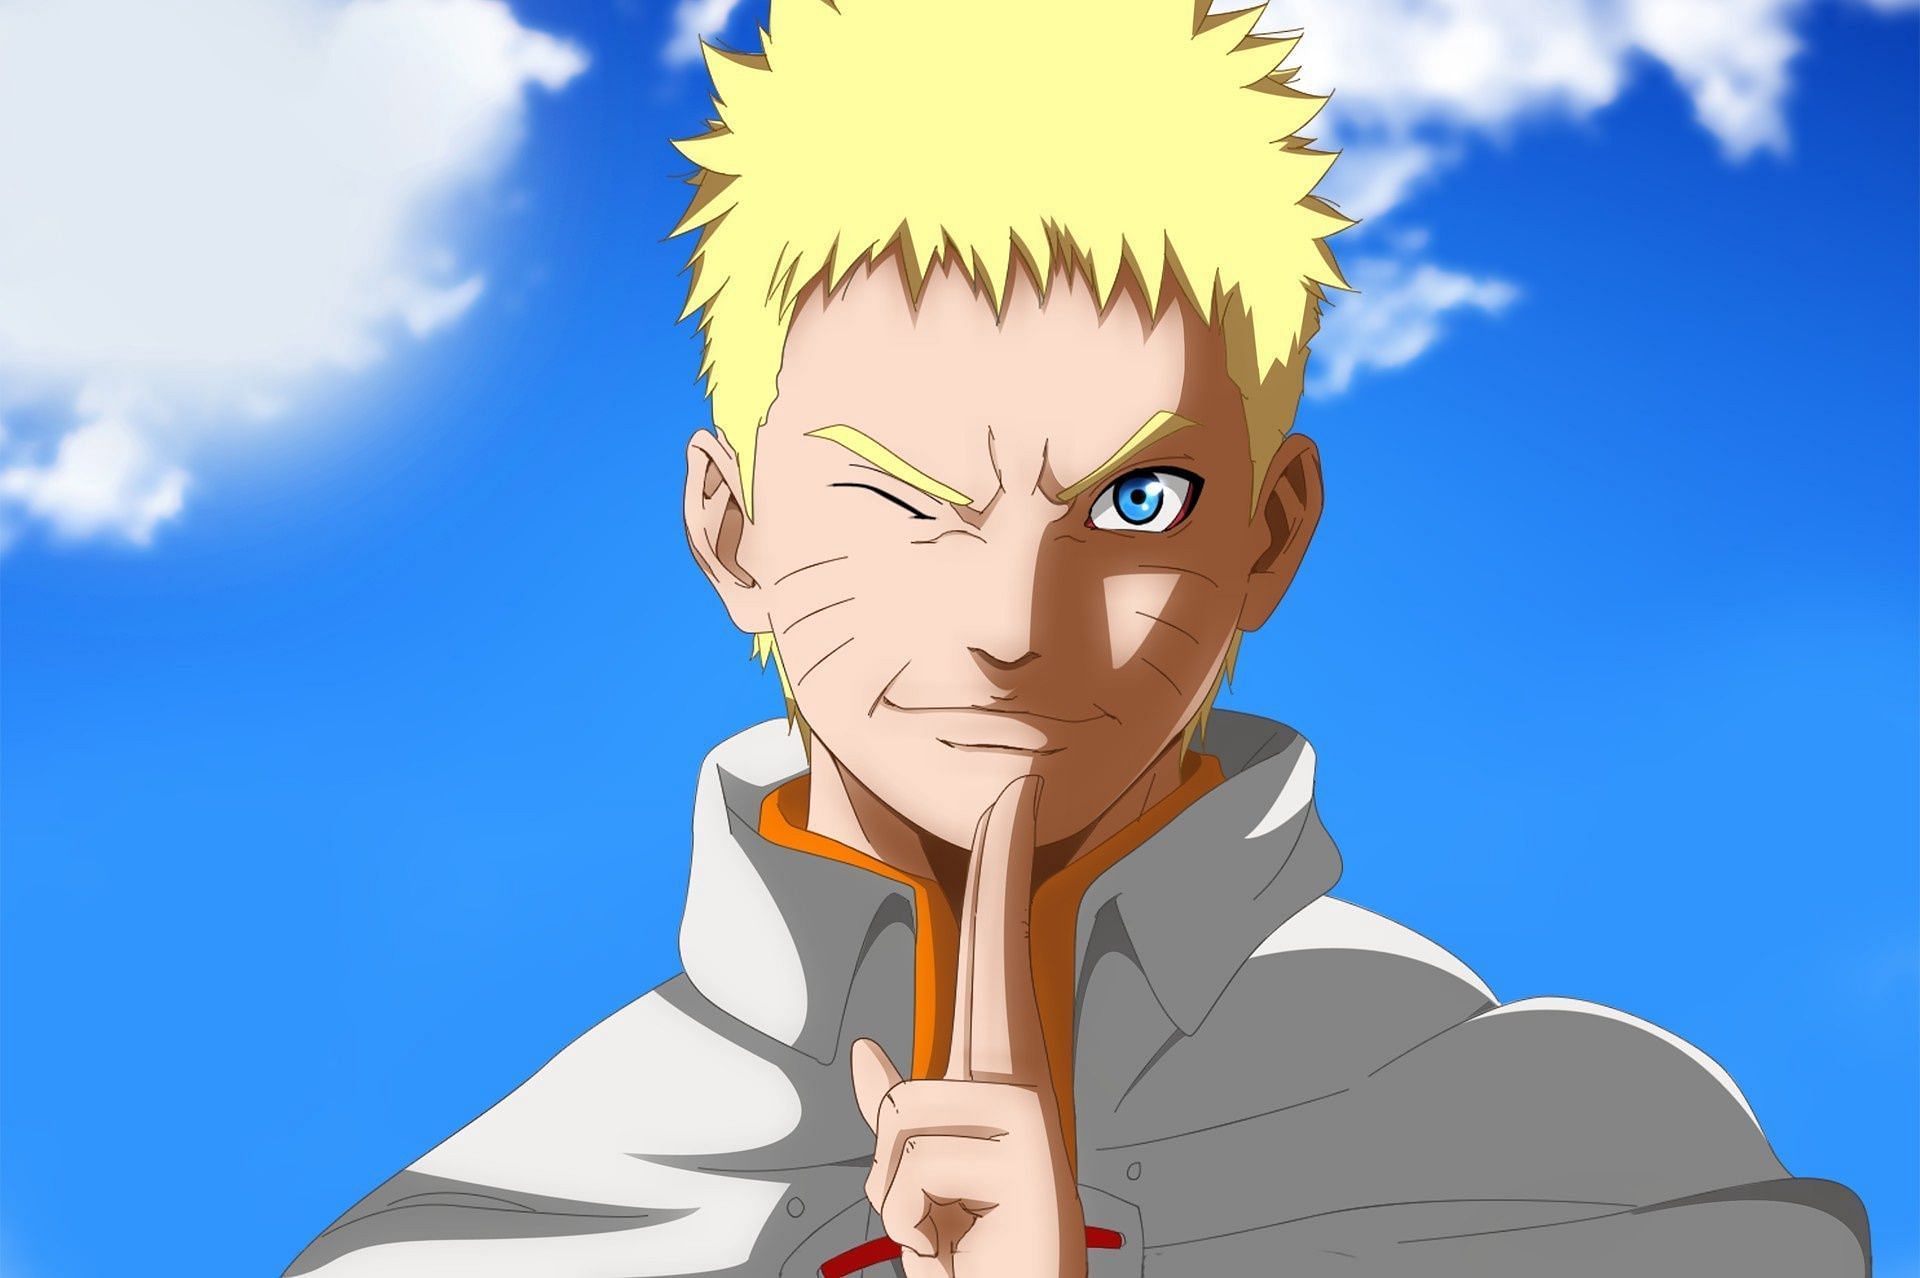 Naruto is one of the fastest anime characters (image via Pierrot)